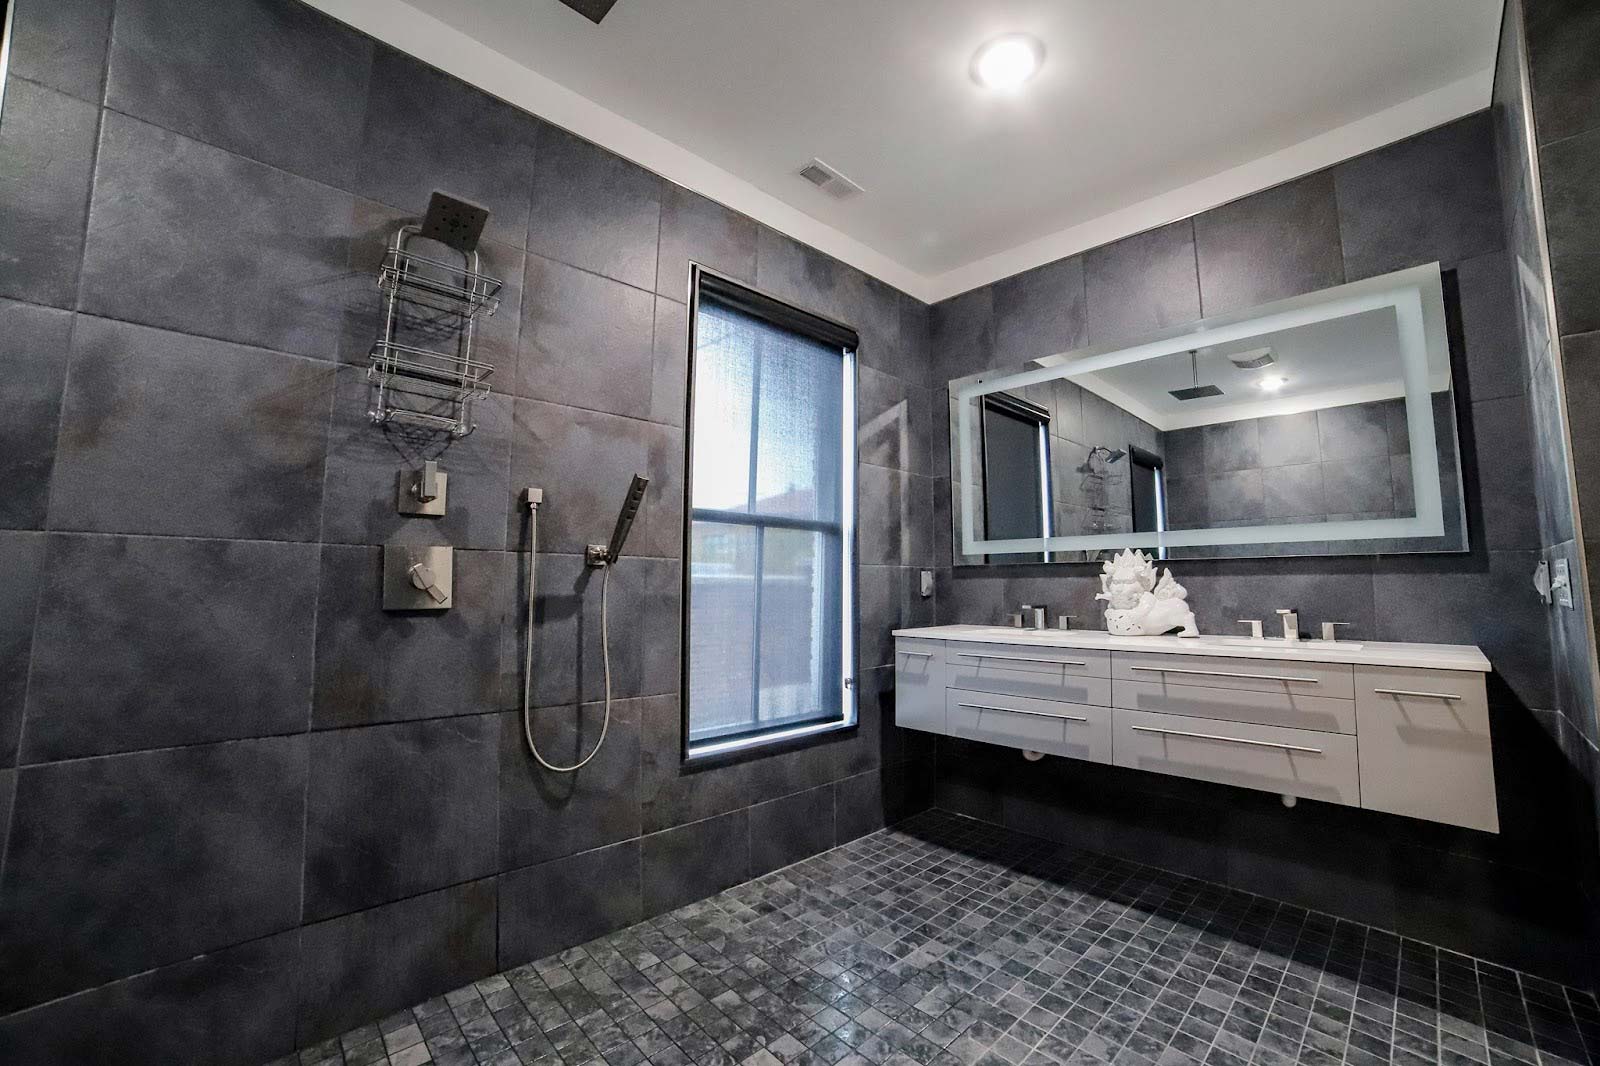 BK Martin with the Do’s and Don’ts for Bathroom Remodeling